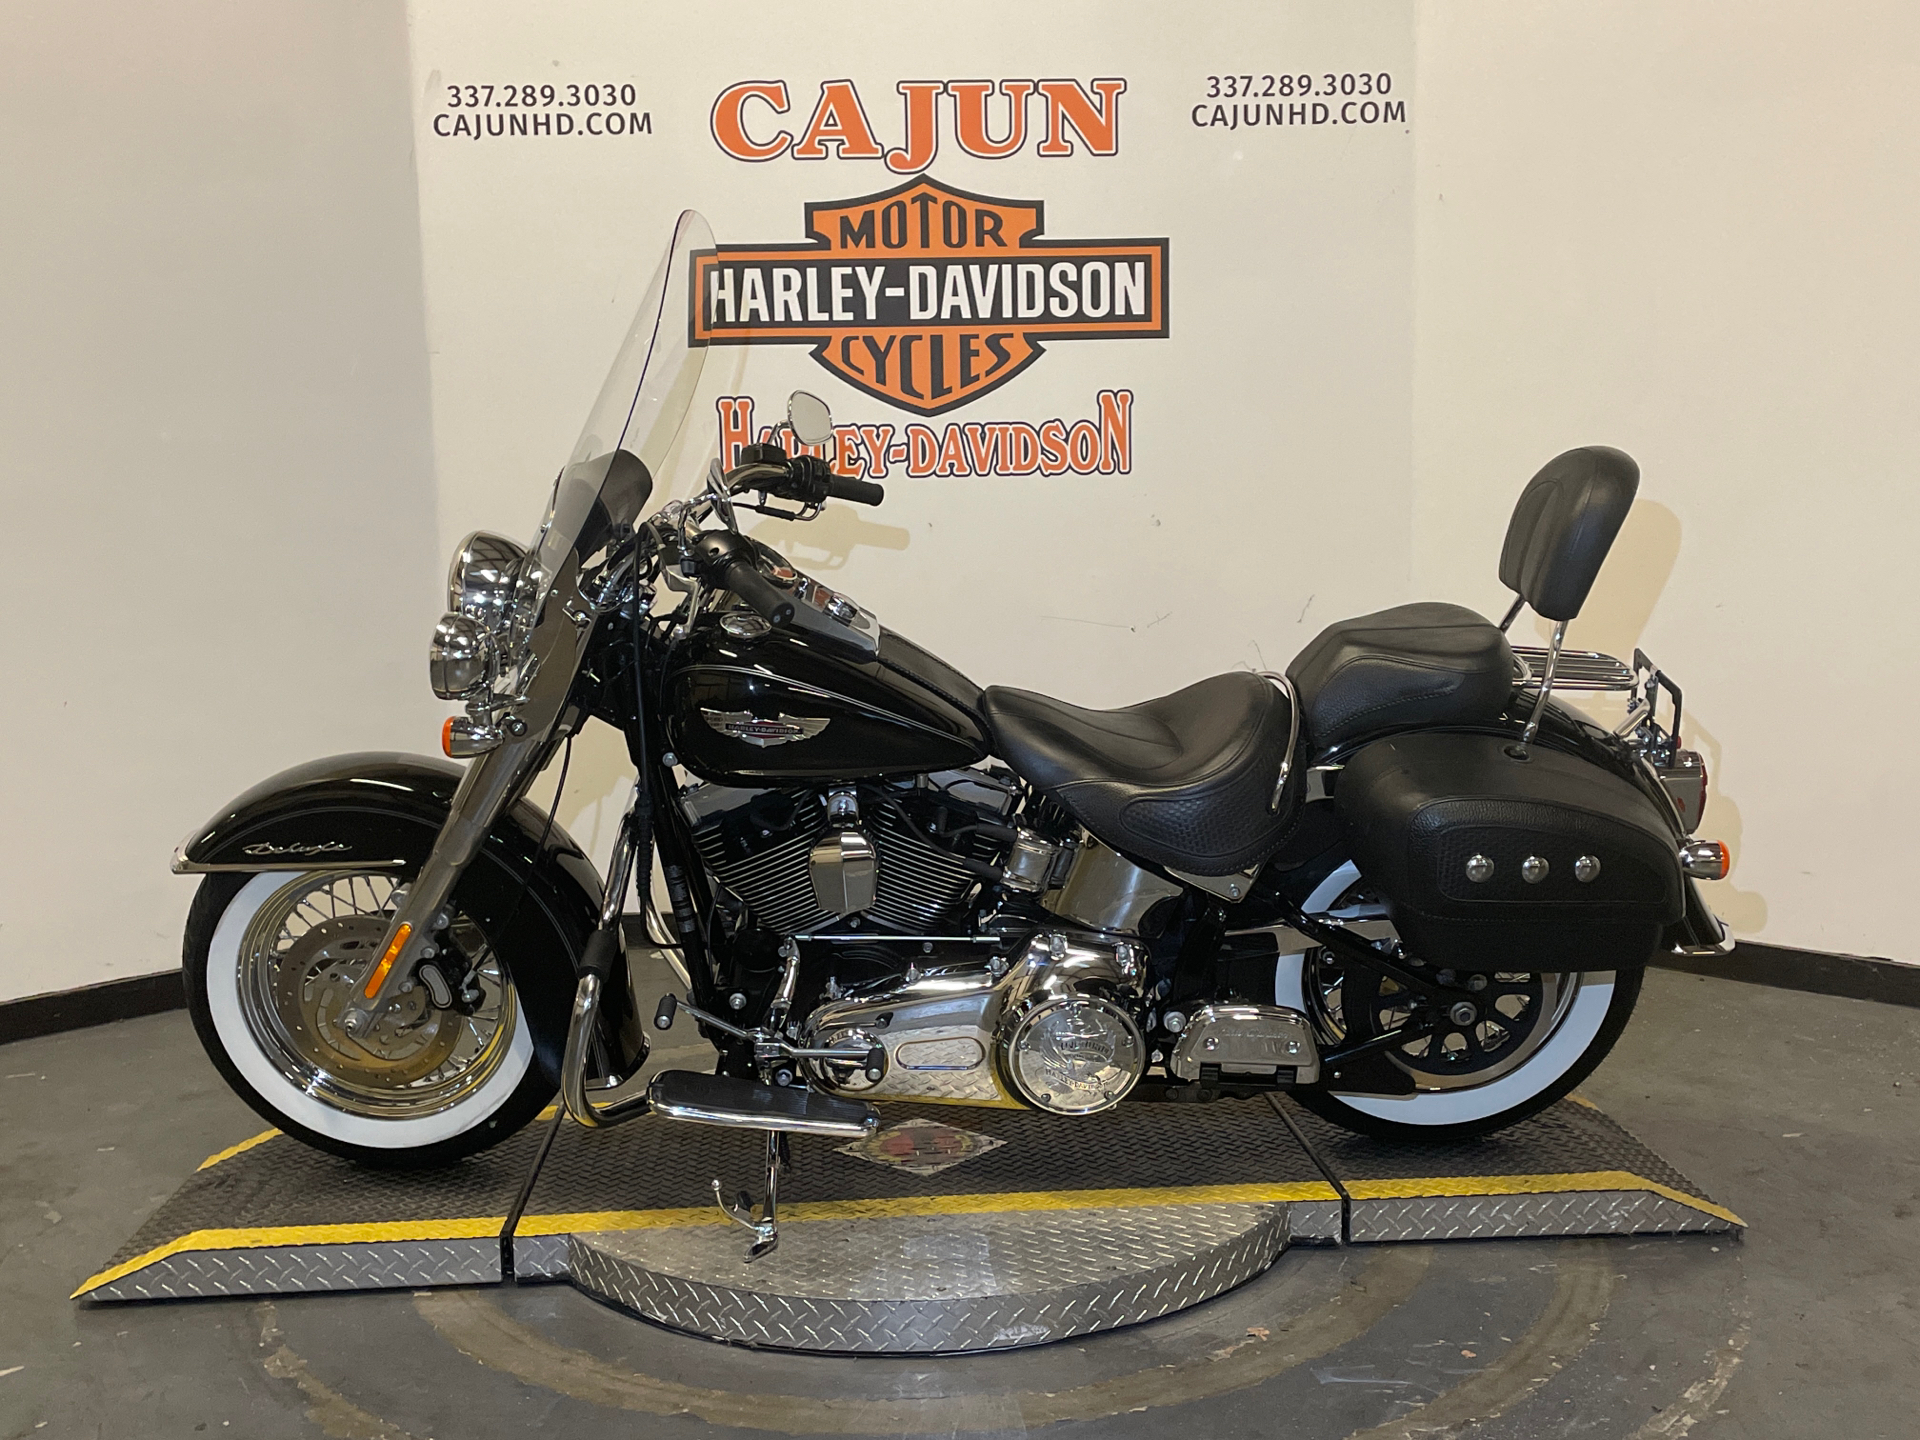 2012 Harley-Davidson Softtail Deluxe near me - Photo 4